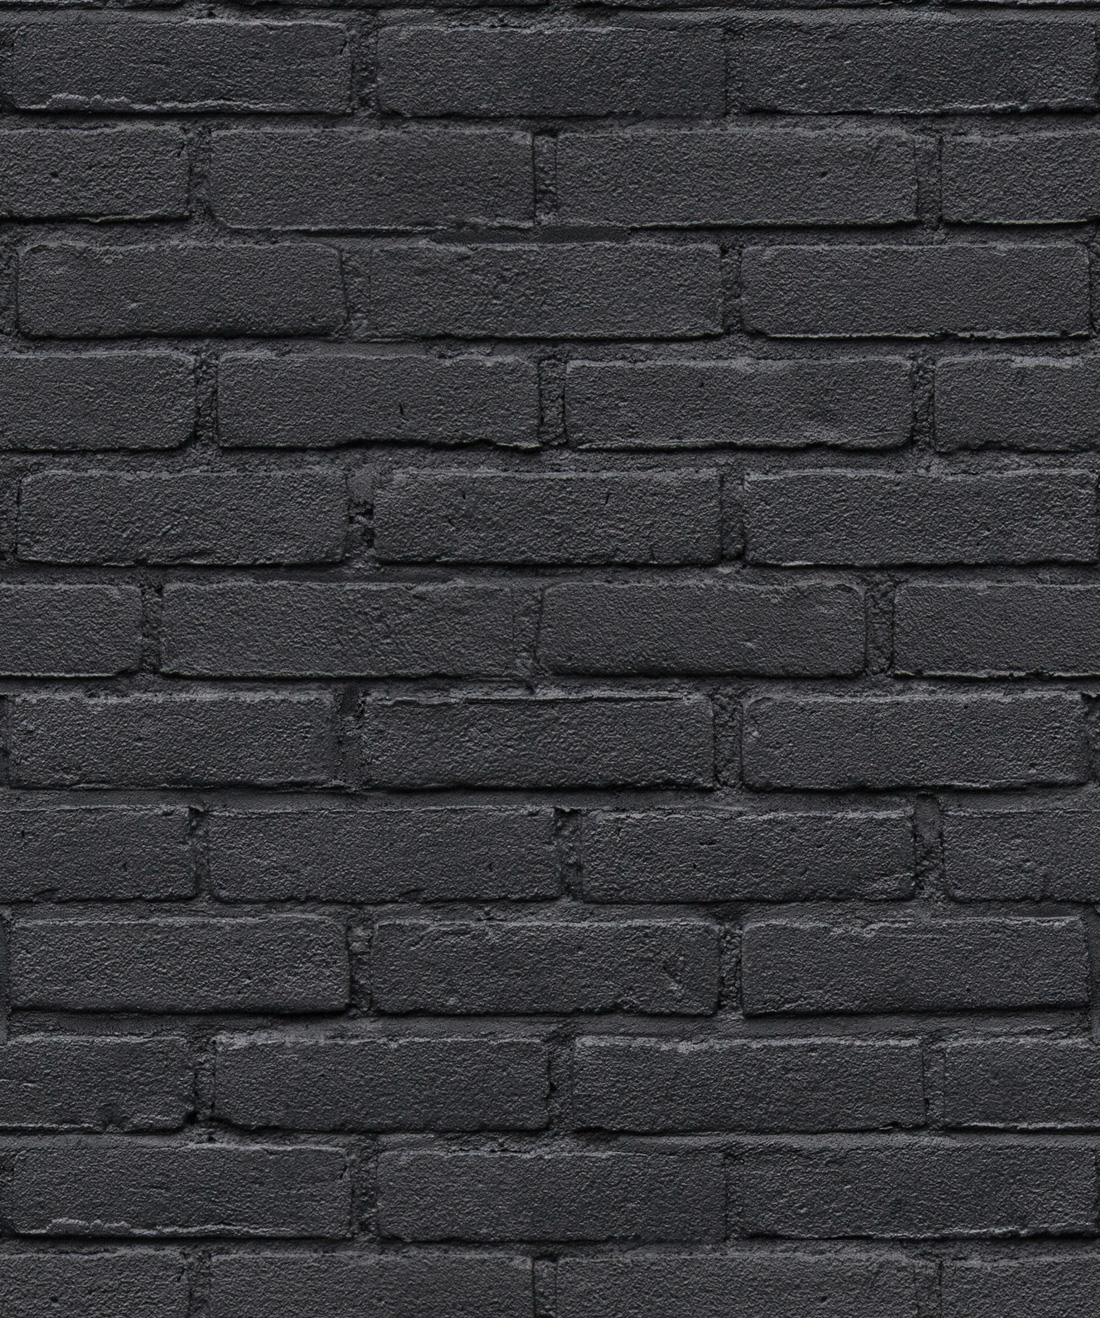 Texture of a perfect black brick wall as background or wallpaper